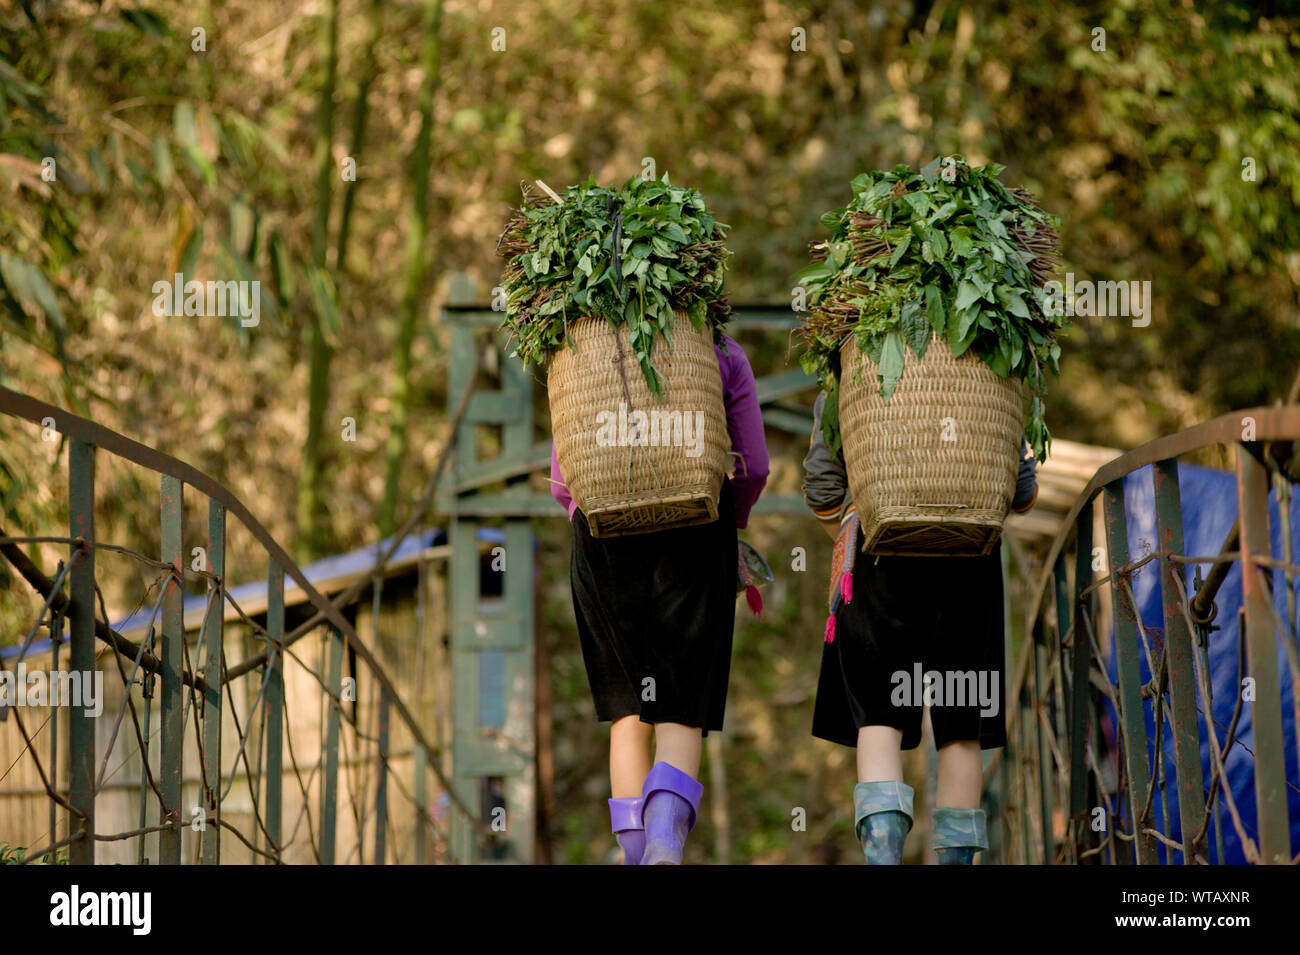 Hmong tribe women carrying plants in hay baskets Stock Photo